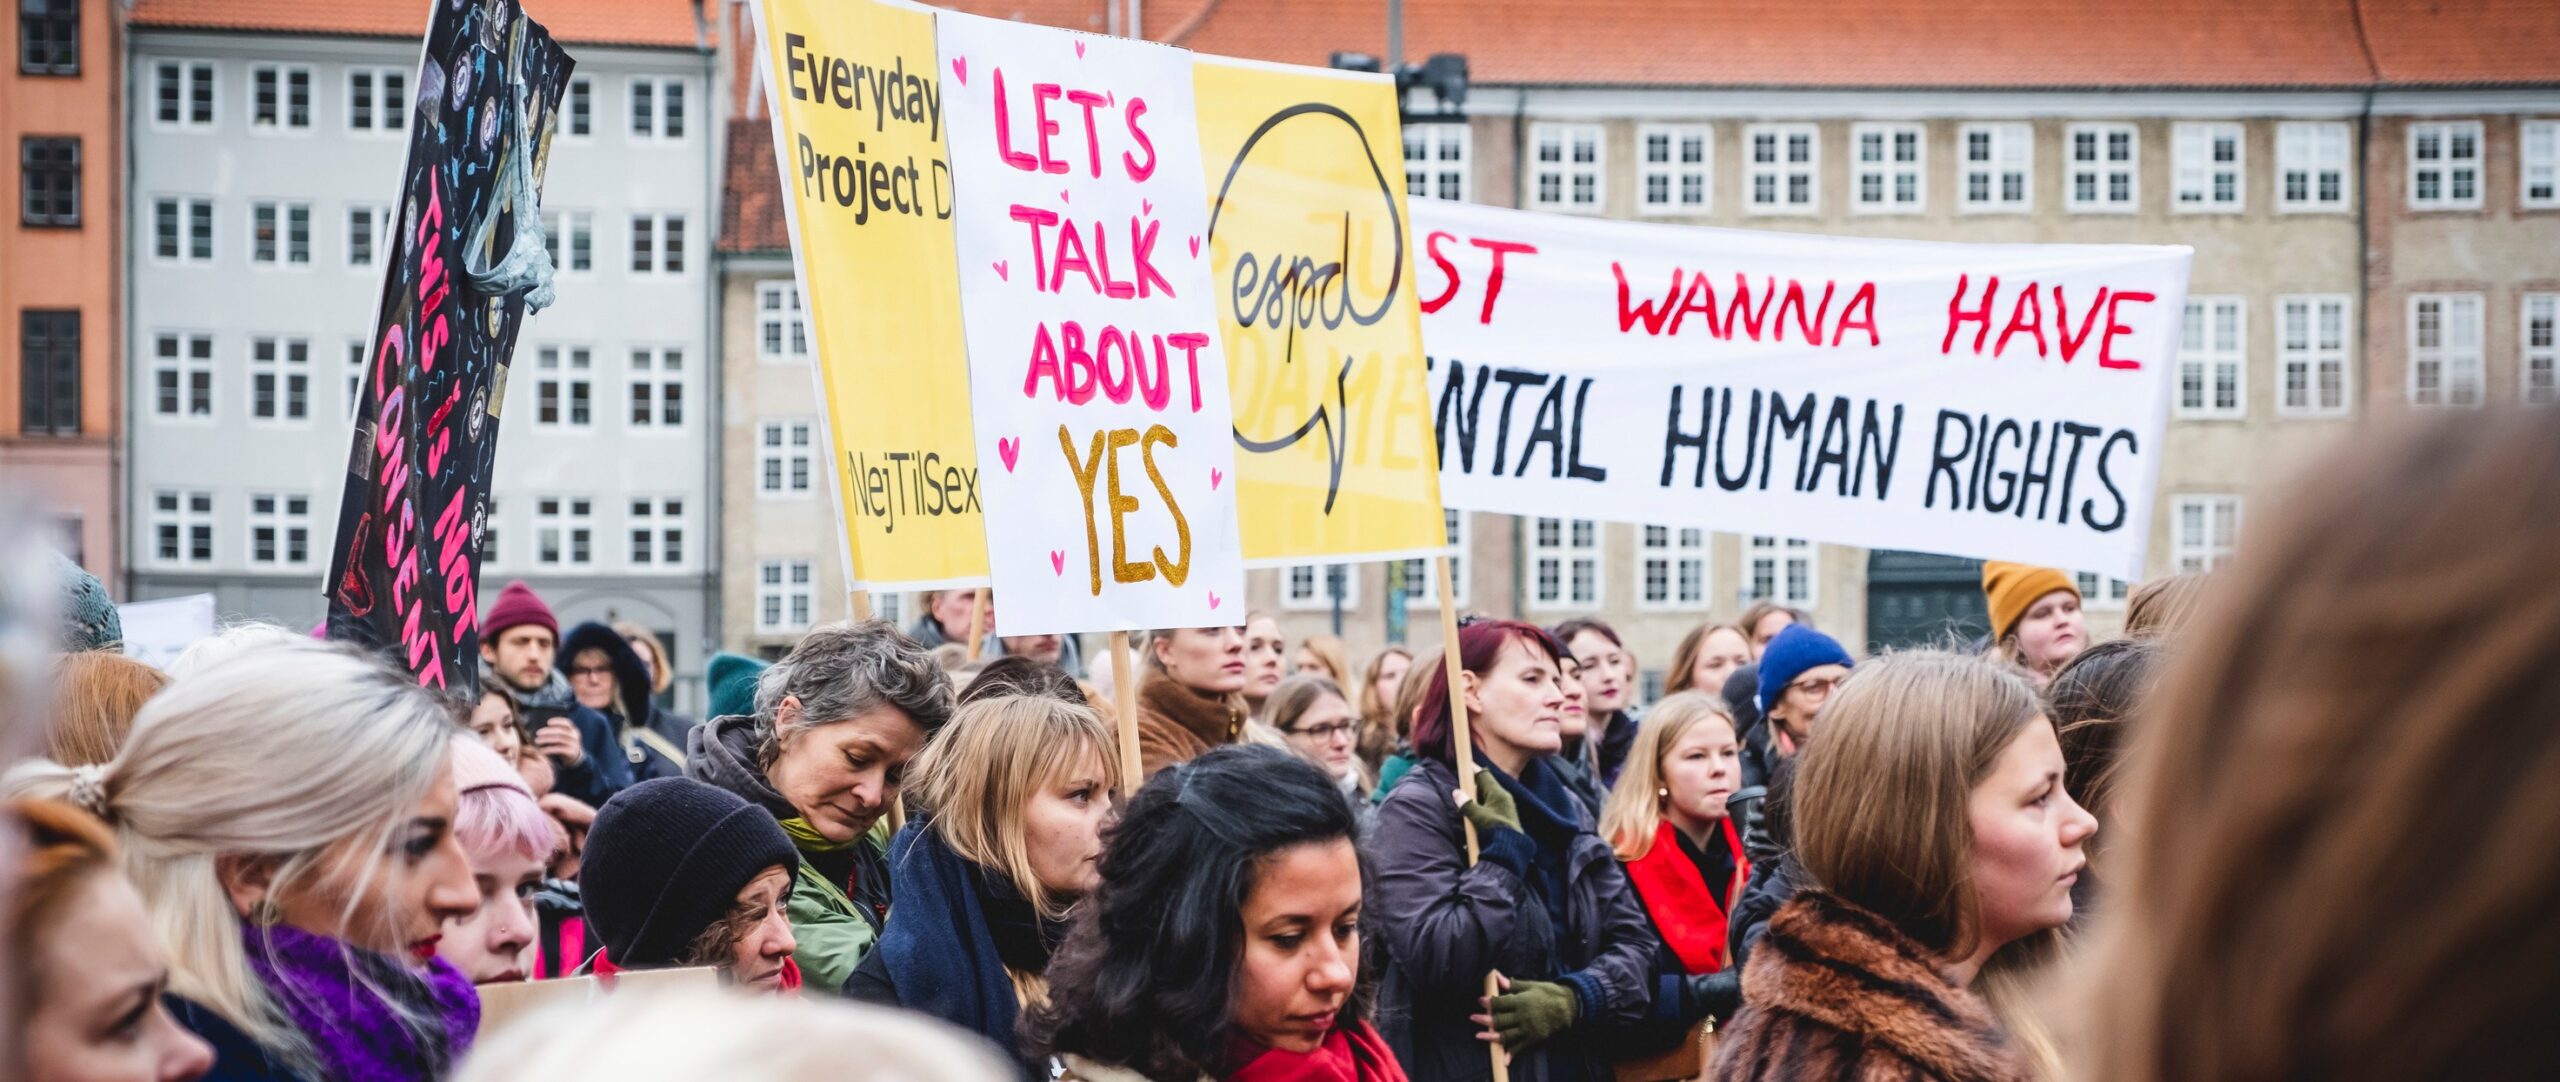 Denmark: Historic victory for women as law changes to recognise that sex without consent is rape